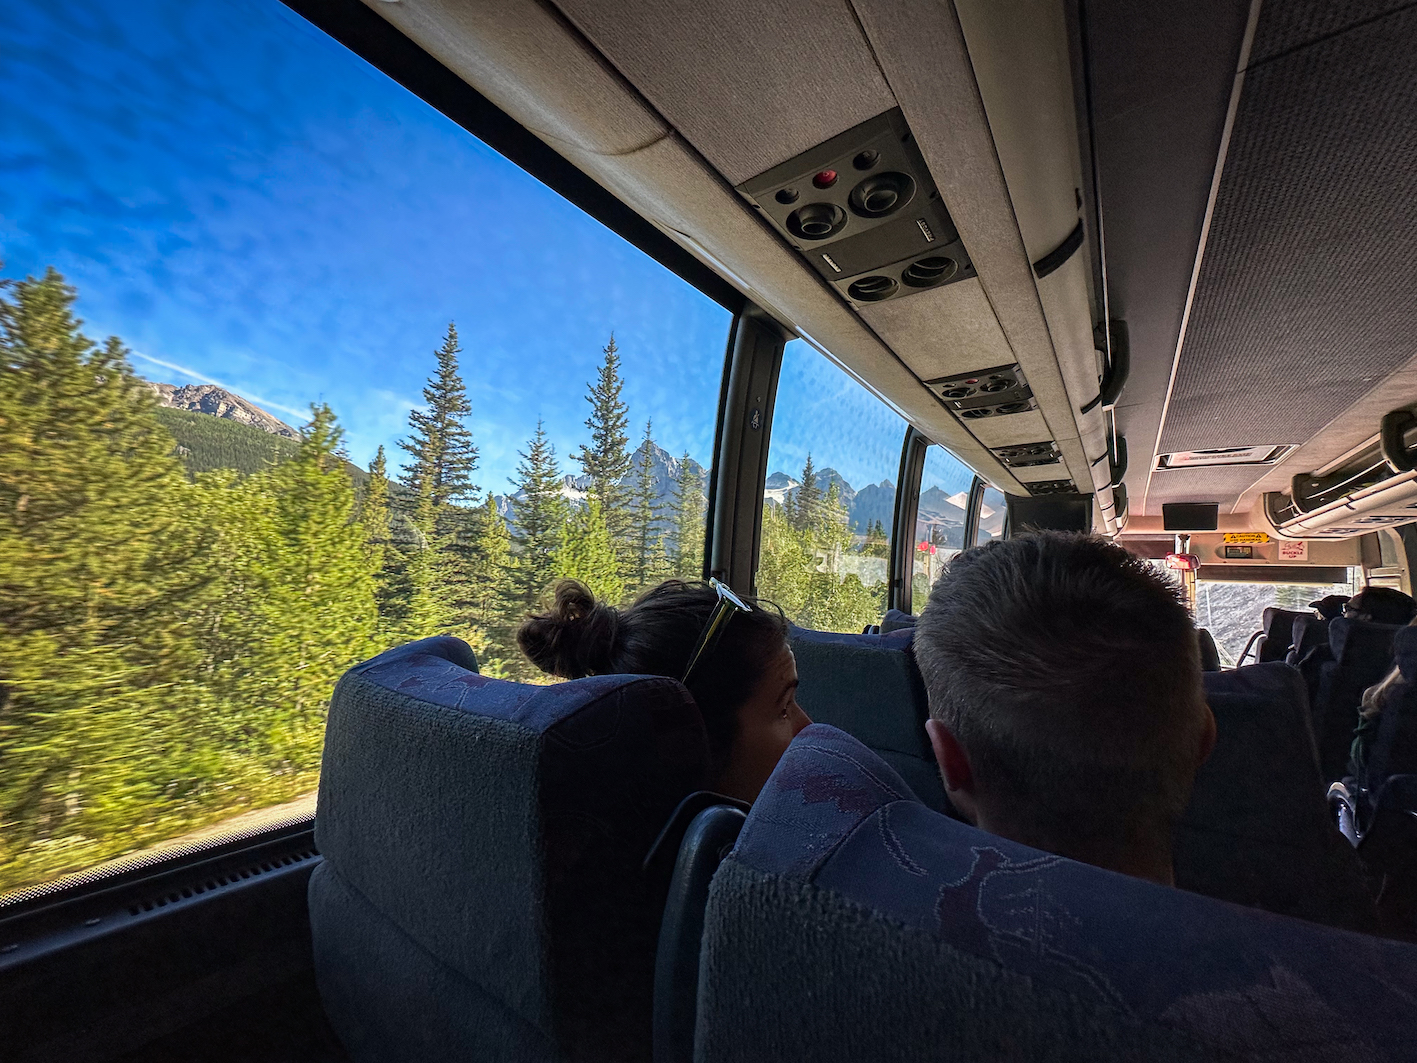 Taking the Parks Canada Shuttle to Moraine Lake